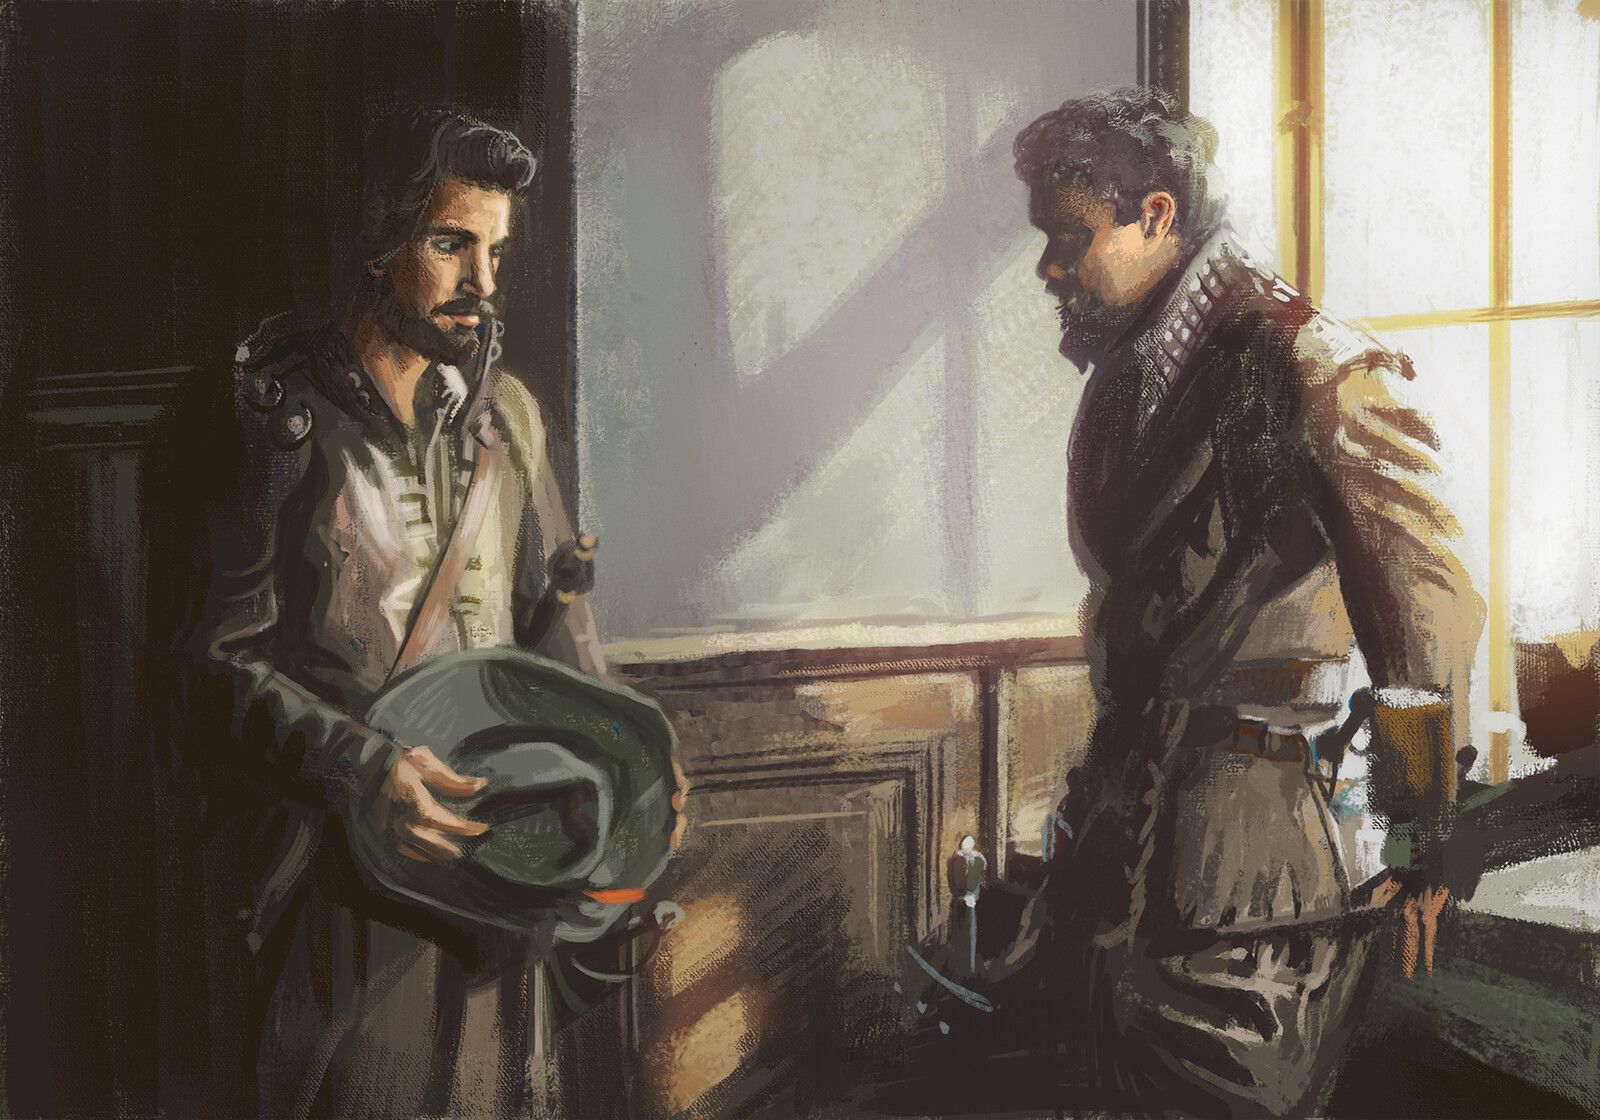 indoor color and light study from the BBC The Musketeers show with Aramis and Porthos.